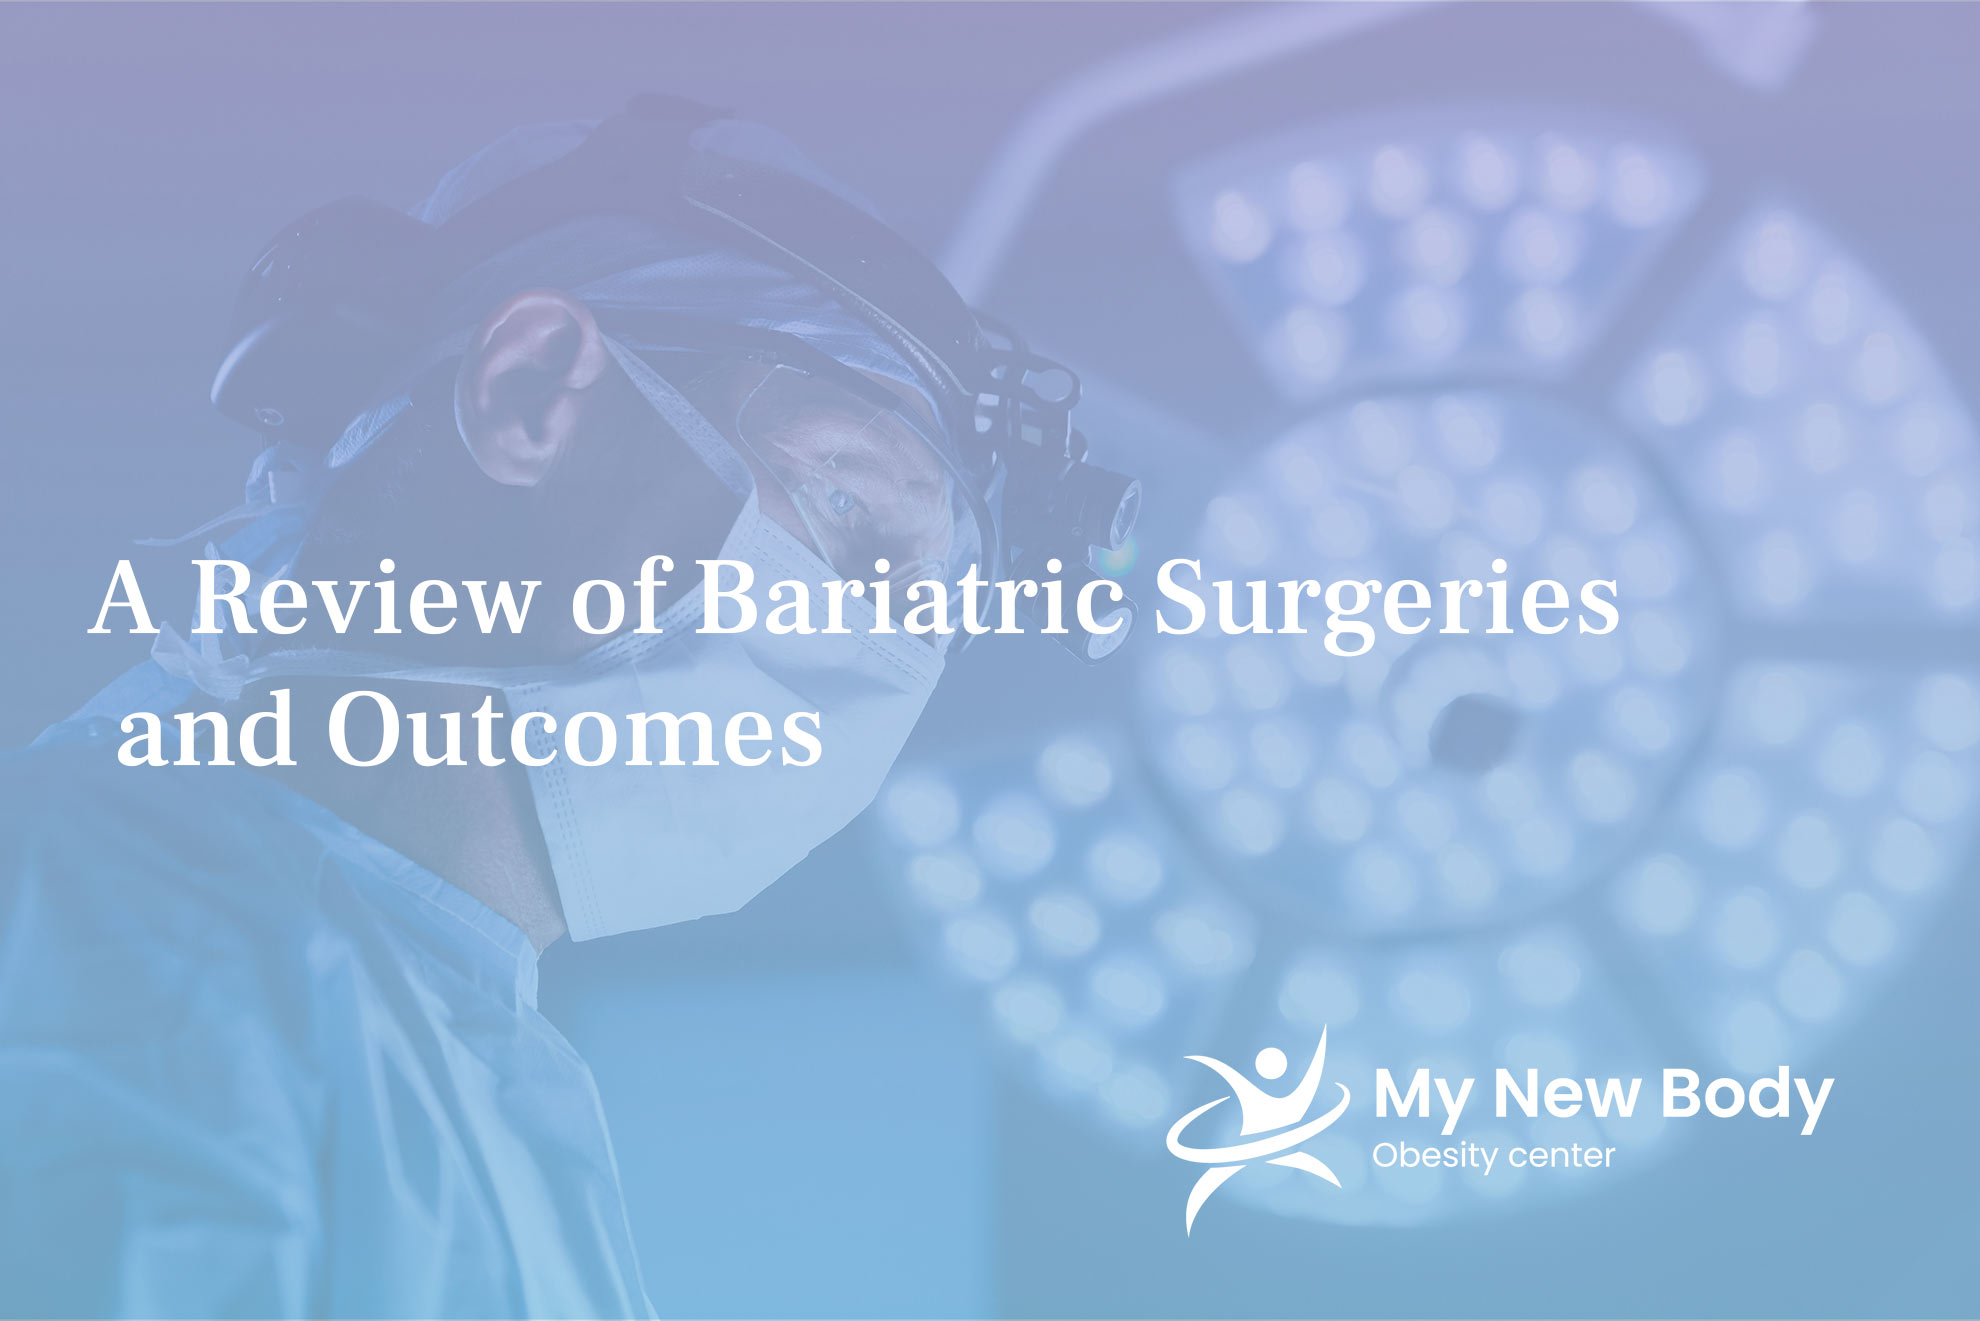 A Review of Bariatric Surgeries and Outcomes